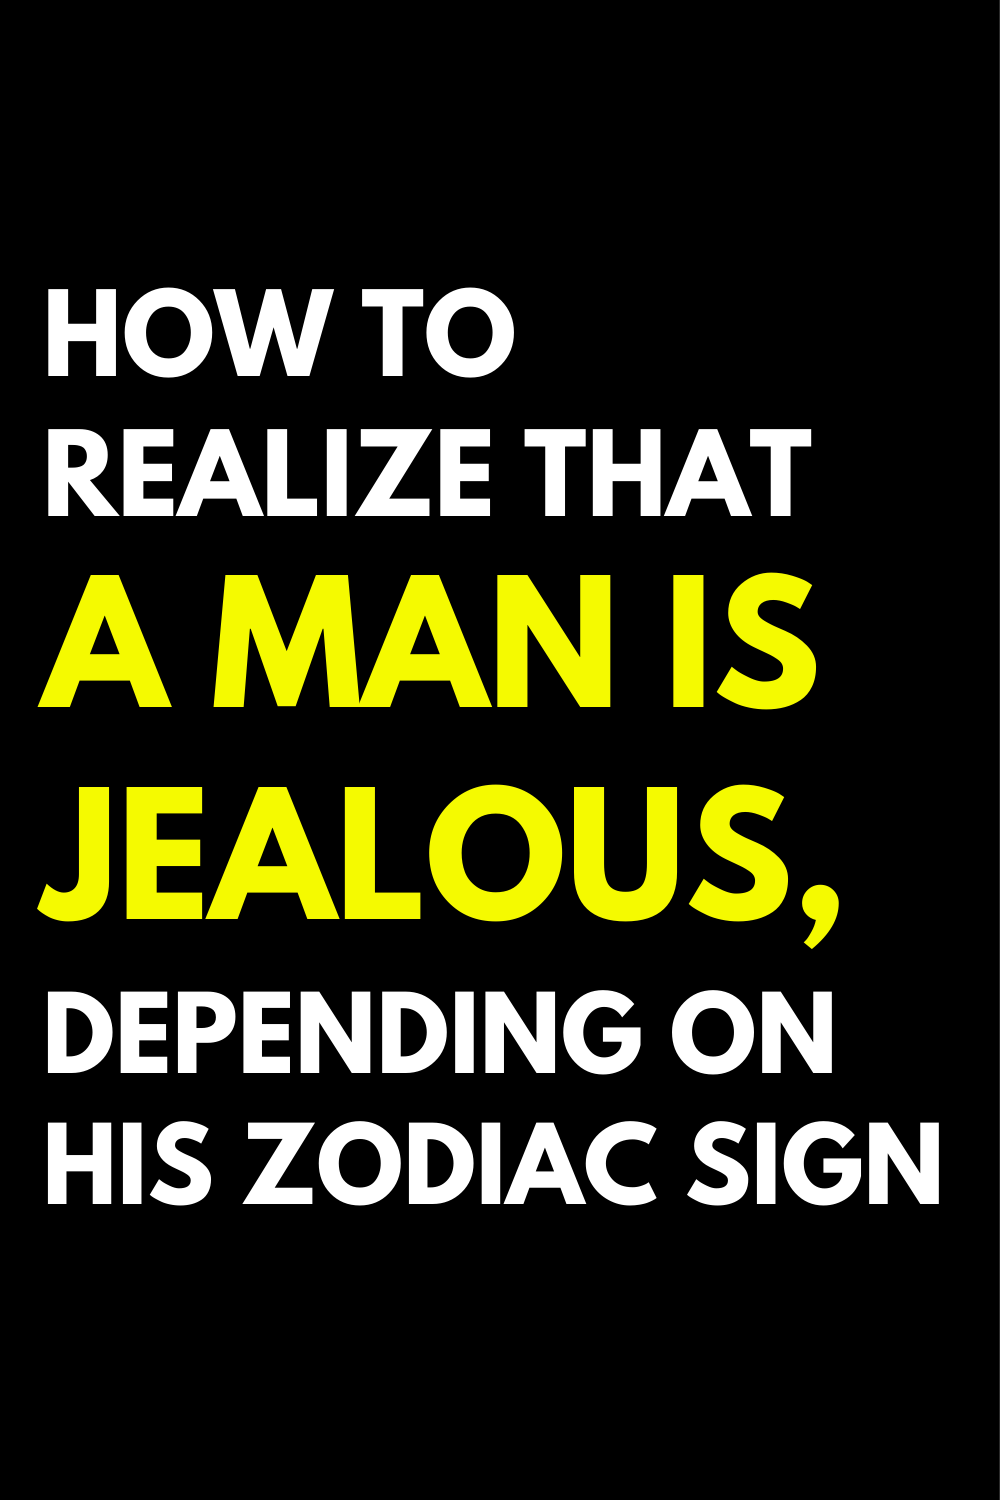 How to realize that a man is jealous, depending on his zodiac sign